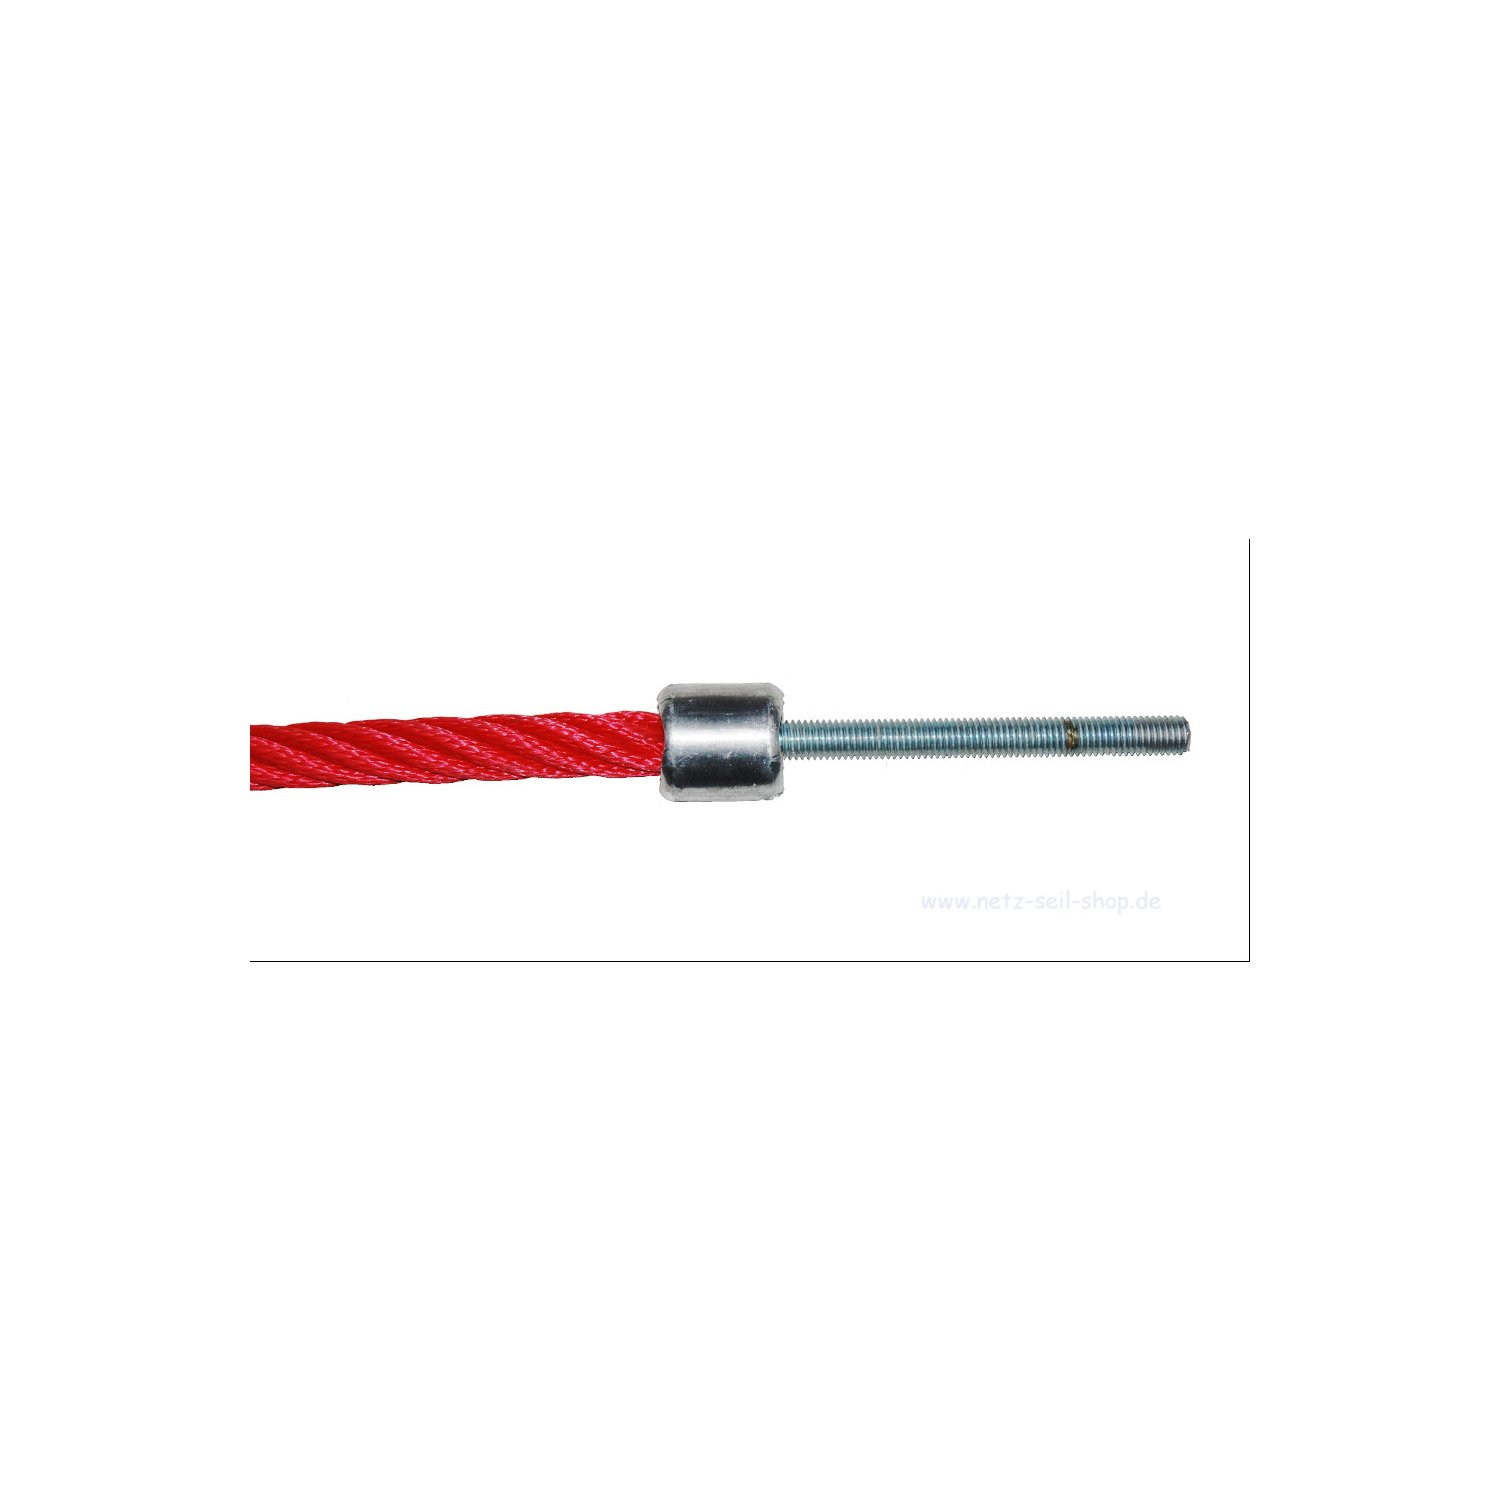 Threaded bolt M12 x 180 mm, galvanised, directly pressed [12,50 EUR]